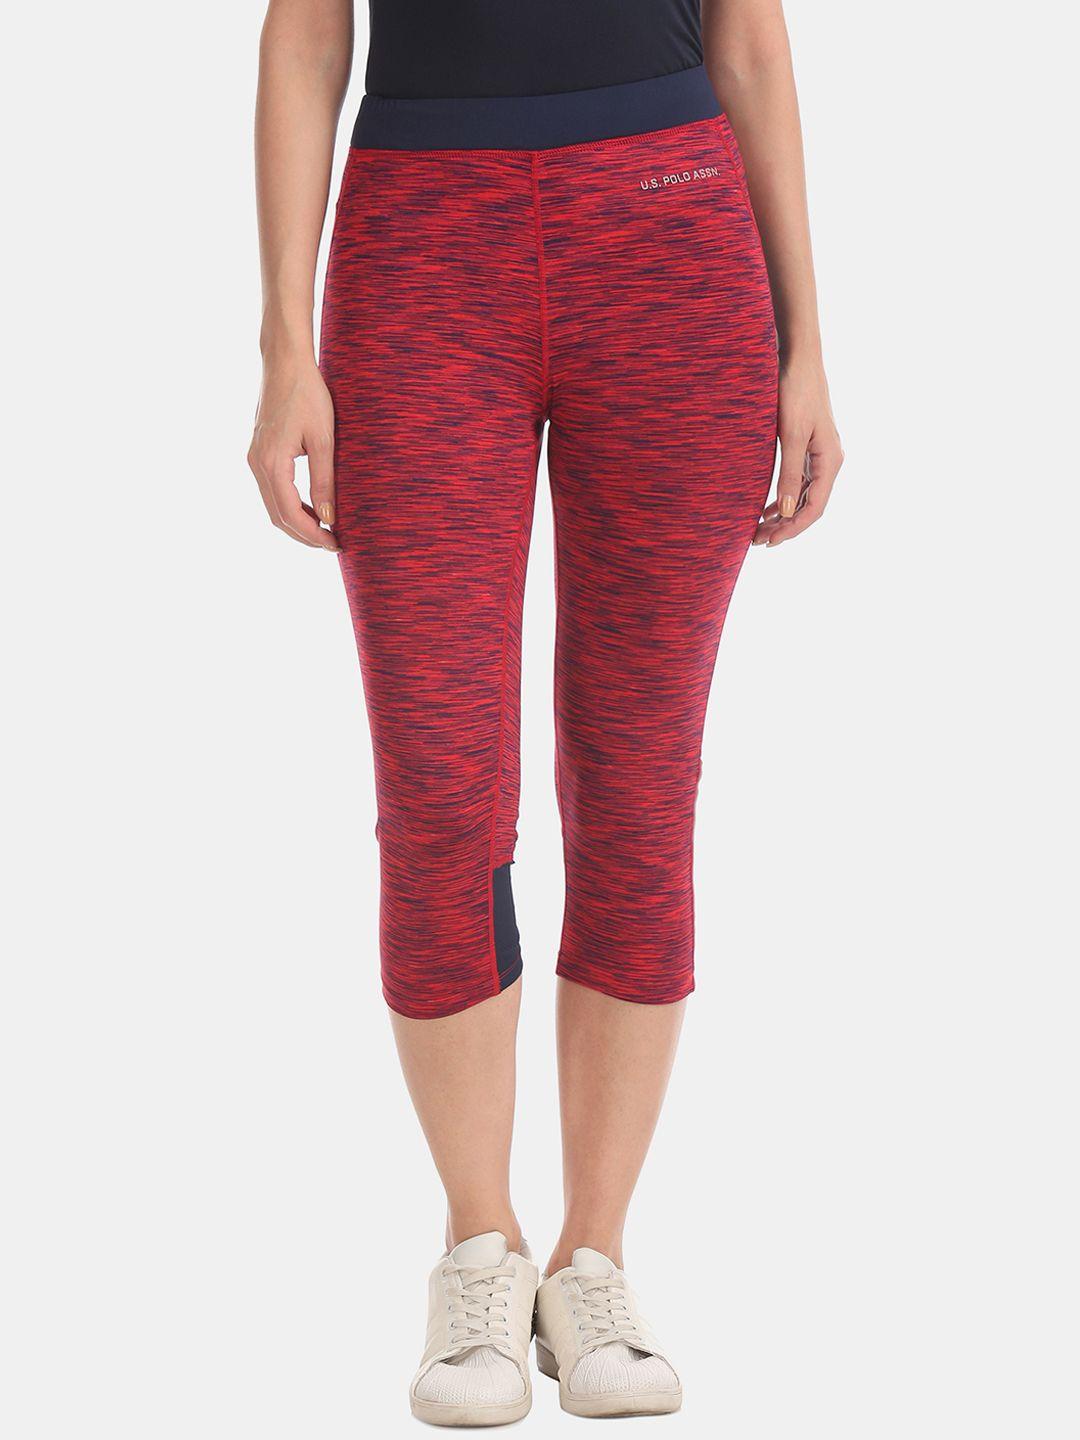 u.s.-polo-assn.-women-women-red-&-black-printed-quick-dry-technology-tights